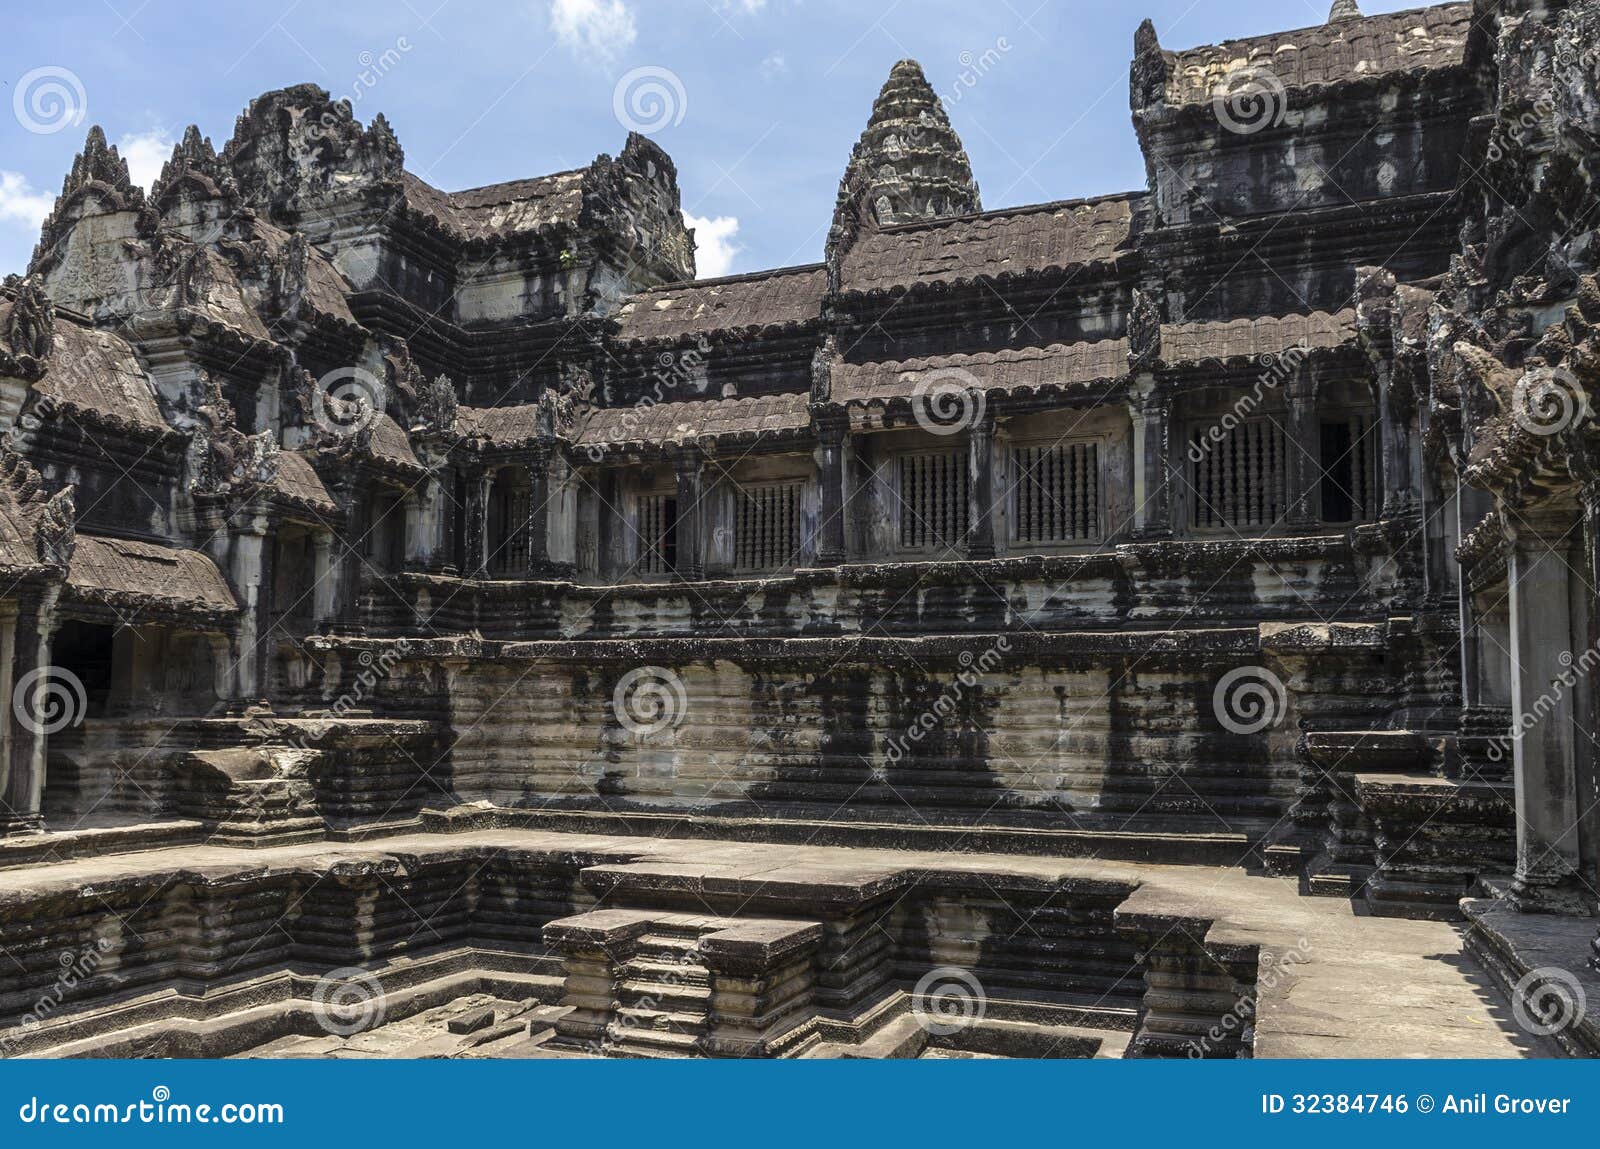 swimming pool with the gallery at angkor wat